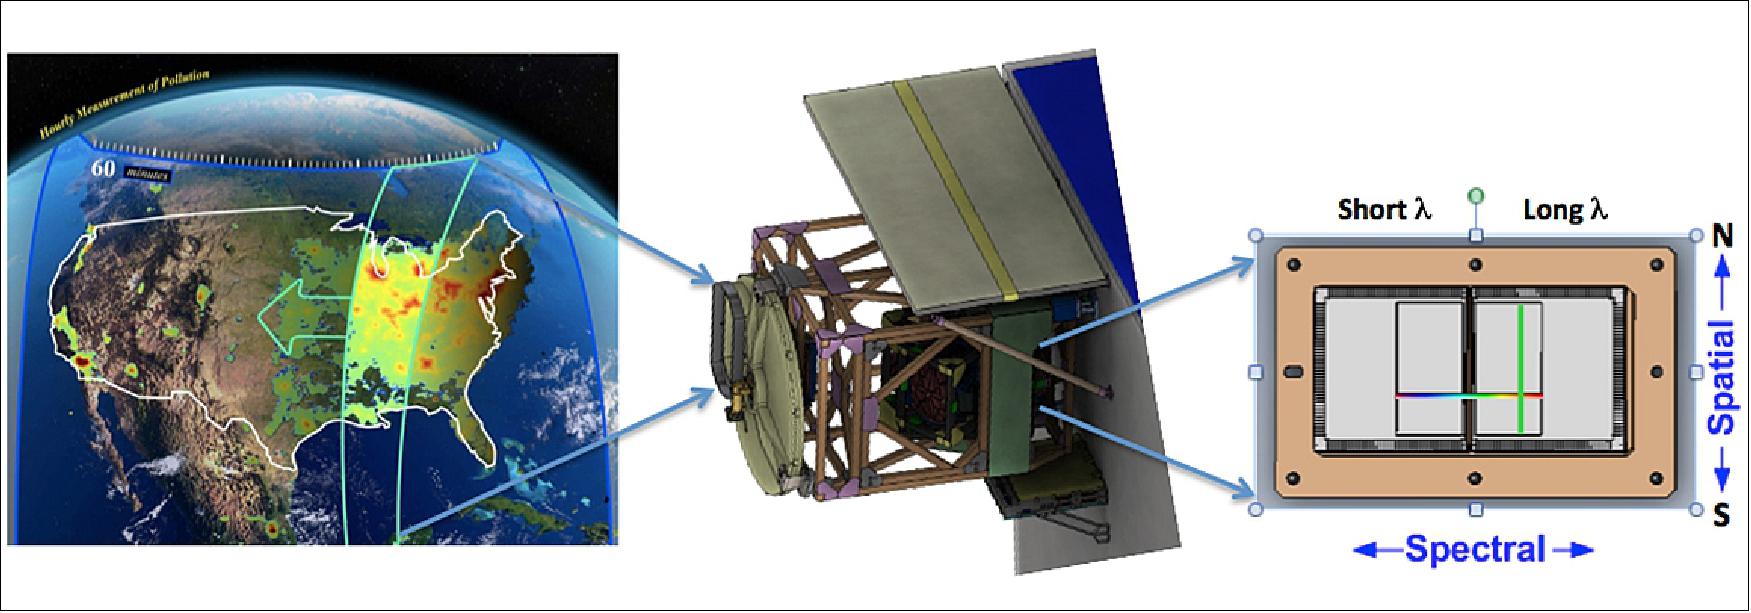 Figure 11: Left: Notional TEMPO FOR over GNA (Greater North America); center: schematic of the TEMPO spectrometer; left: scan mirror window (image credit: NASA, BATC, SAO)